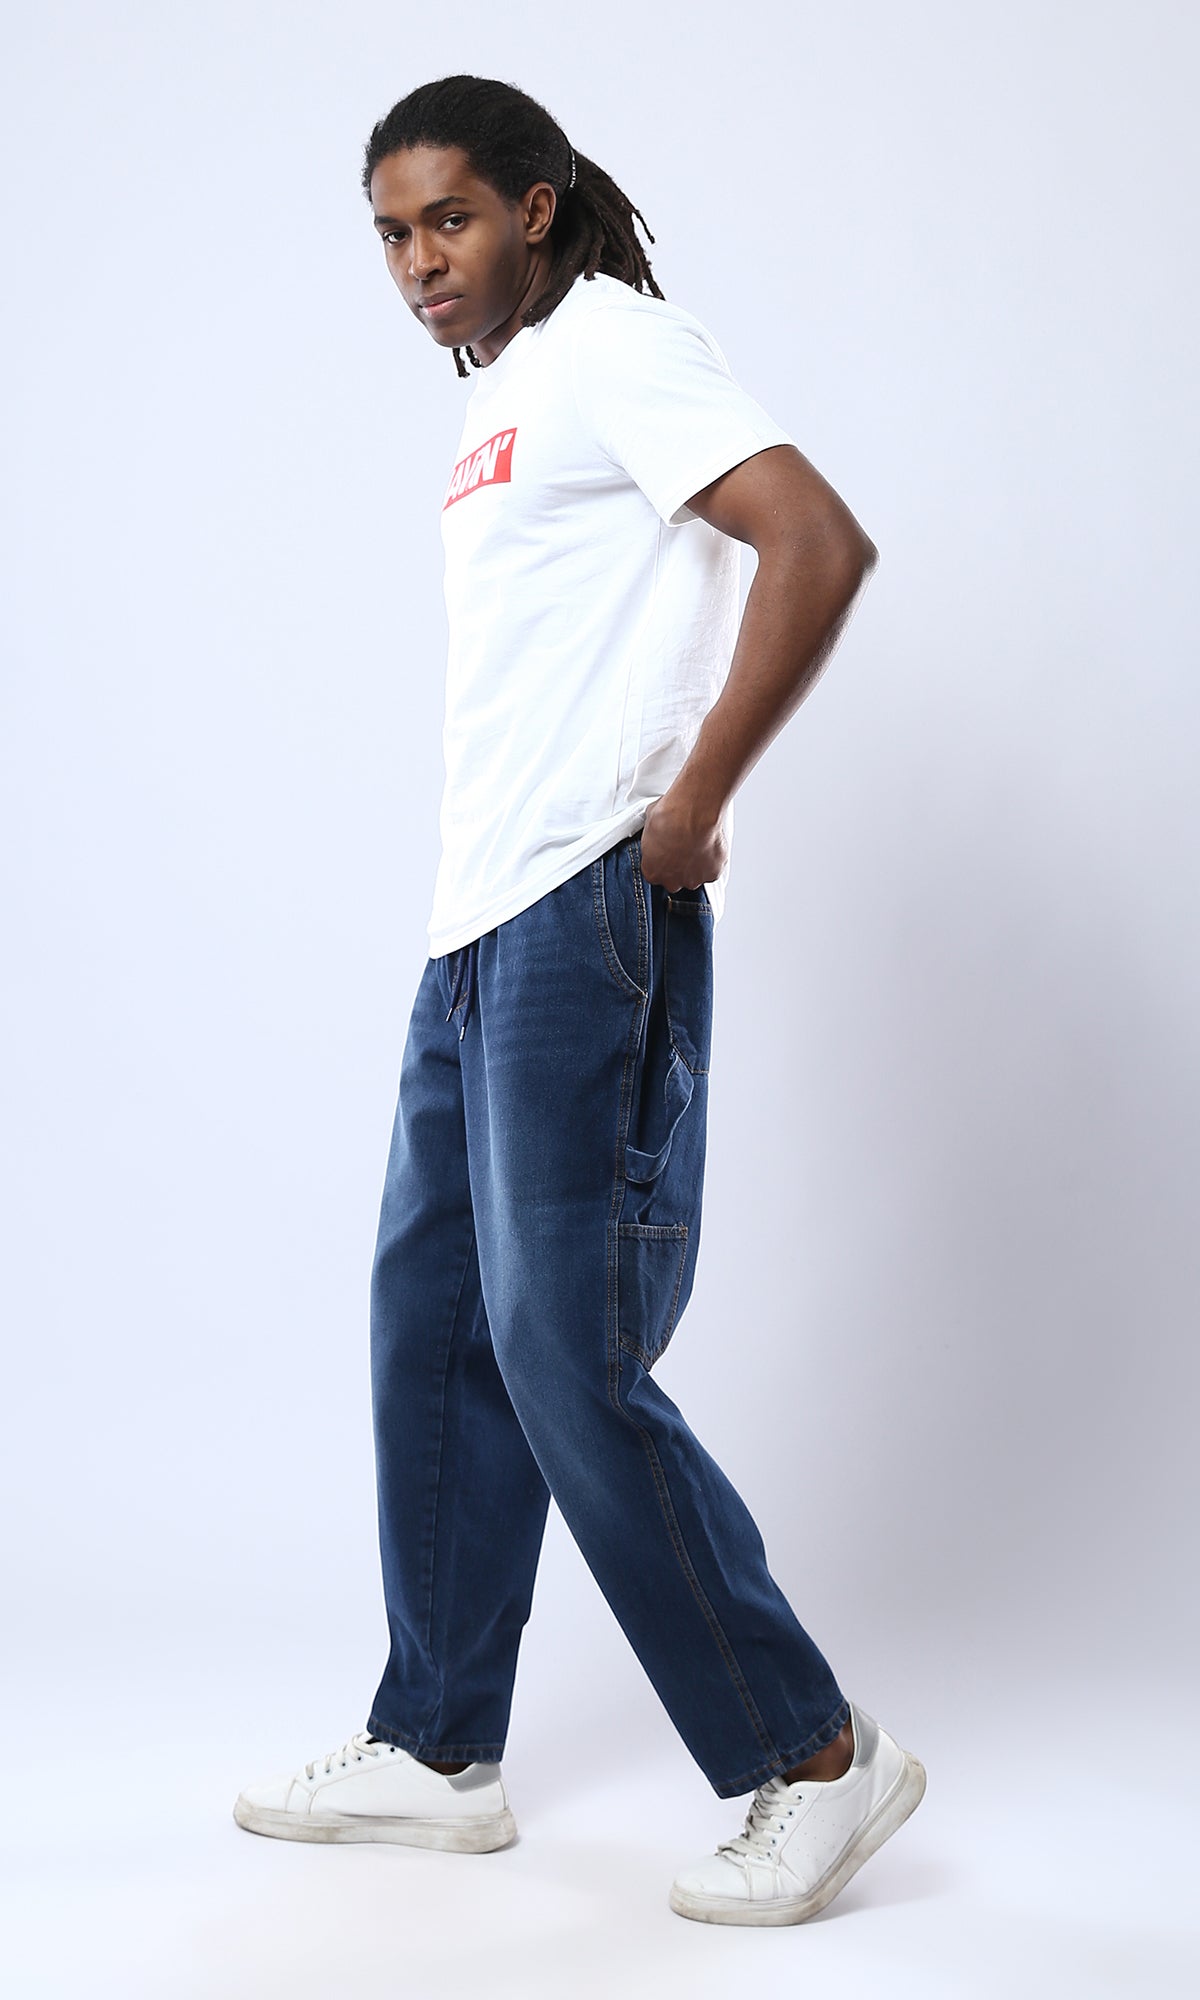 O174039 Standard Blue Casual Balloon Jeans With Drawstring